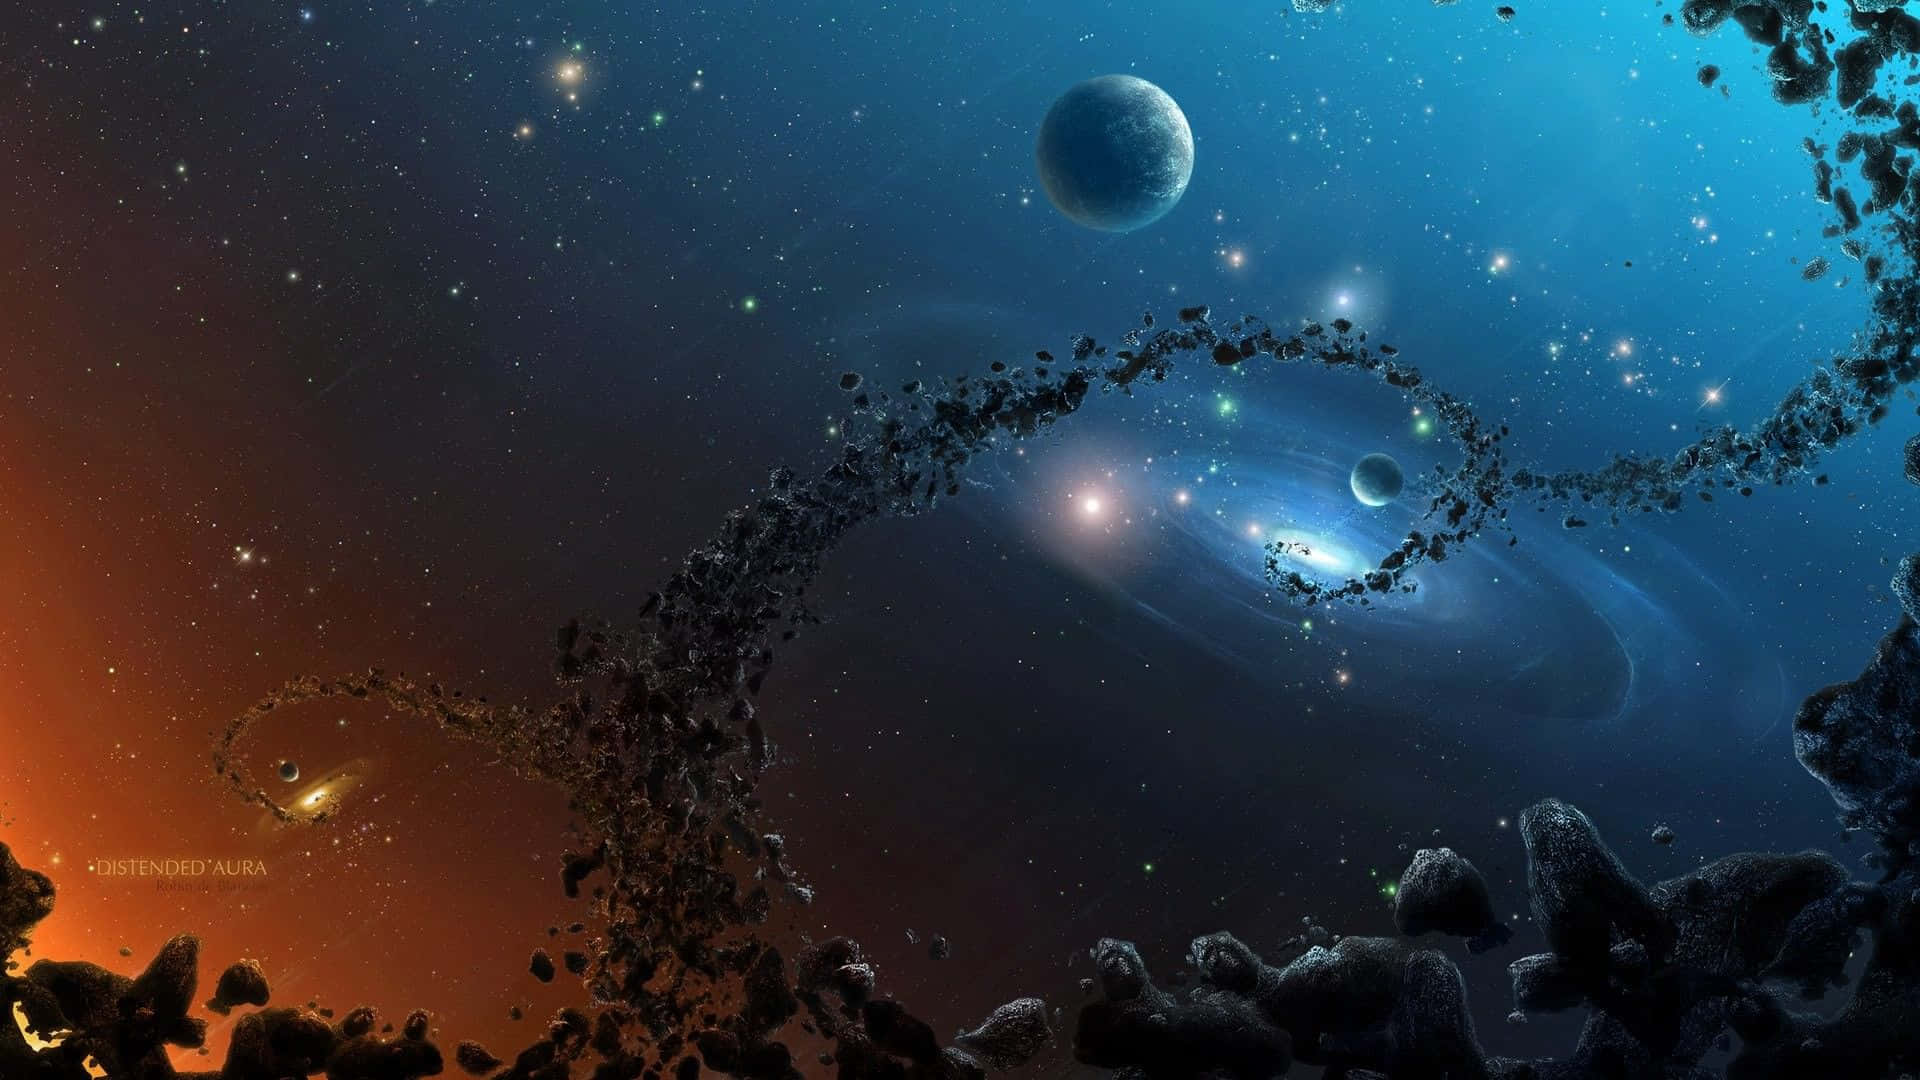 Explore the wonders of space with this stunning animated wallpaper.